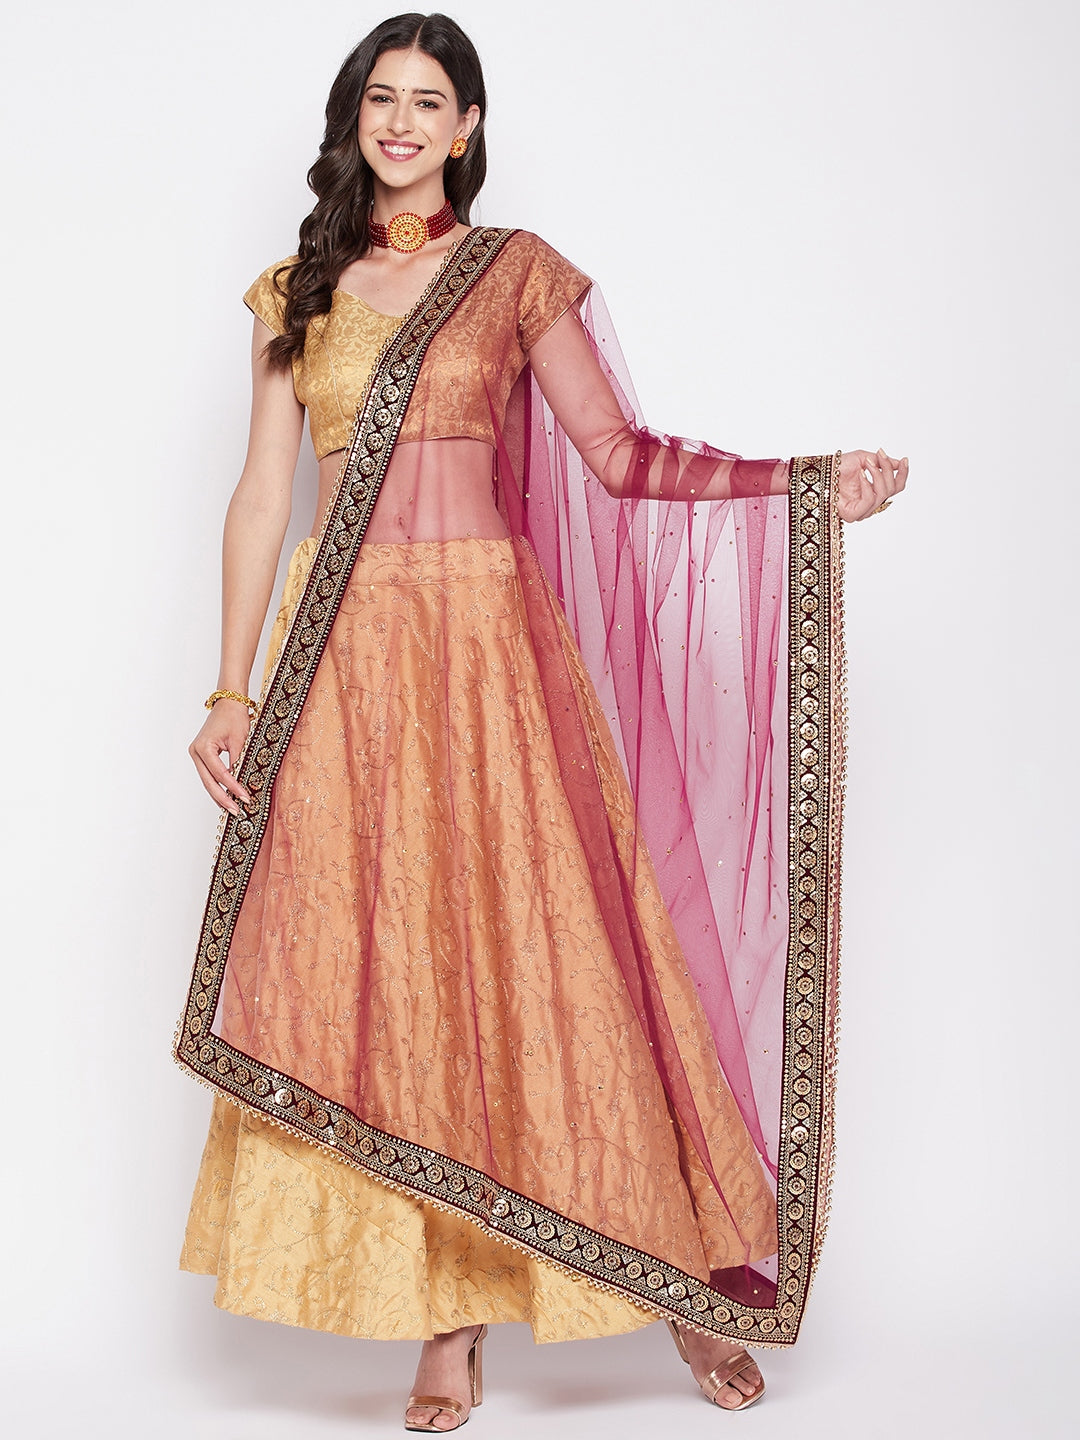 Clora Wine Embellished Net Dupatta with Sequinned